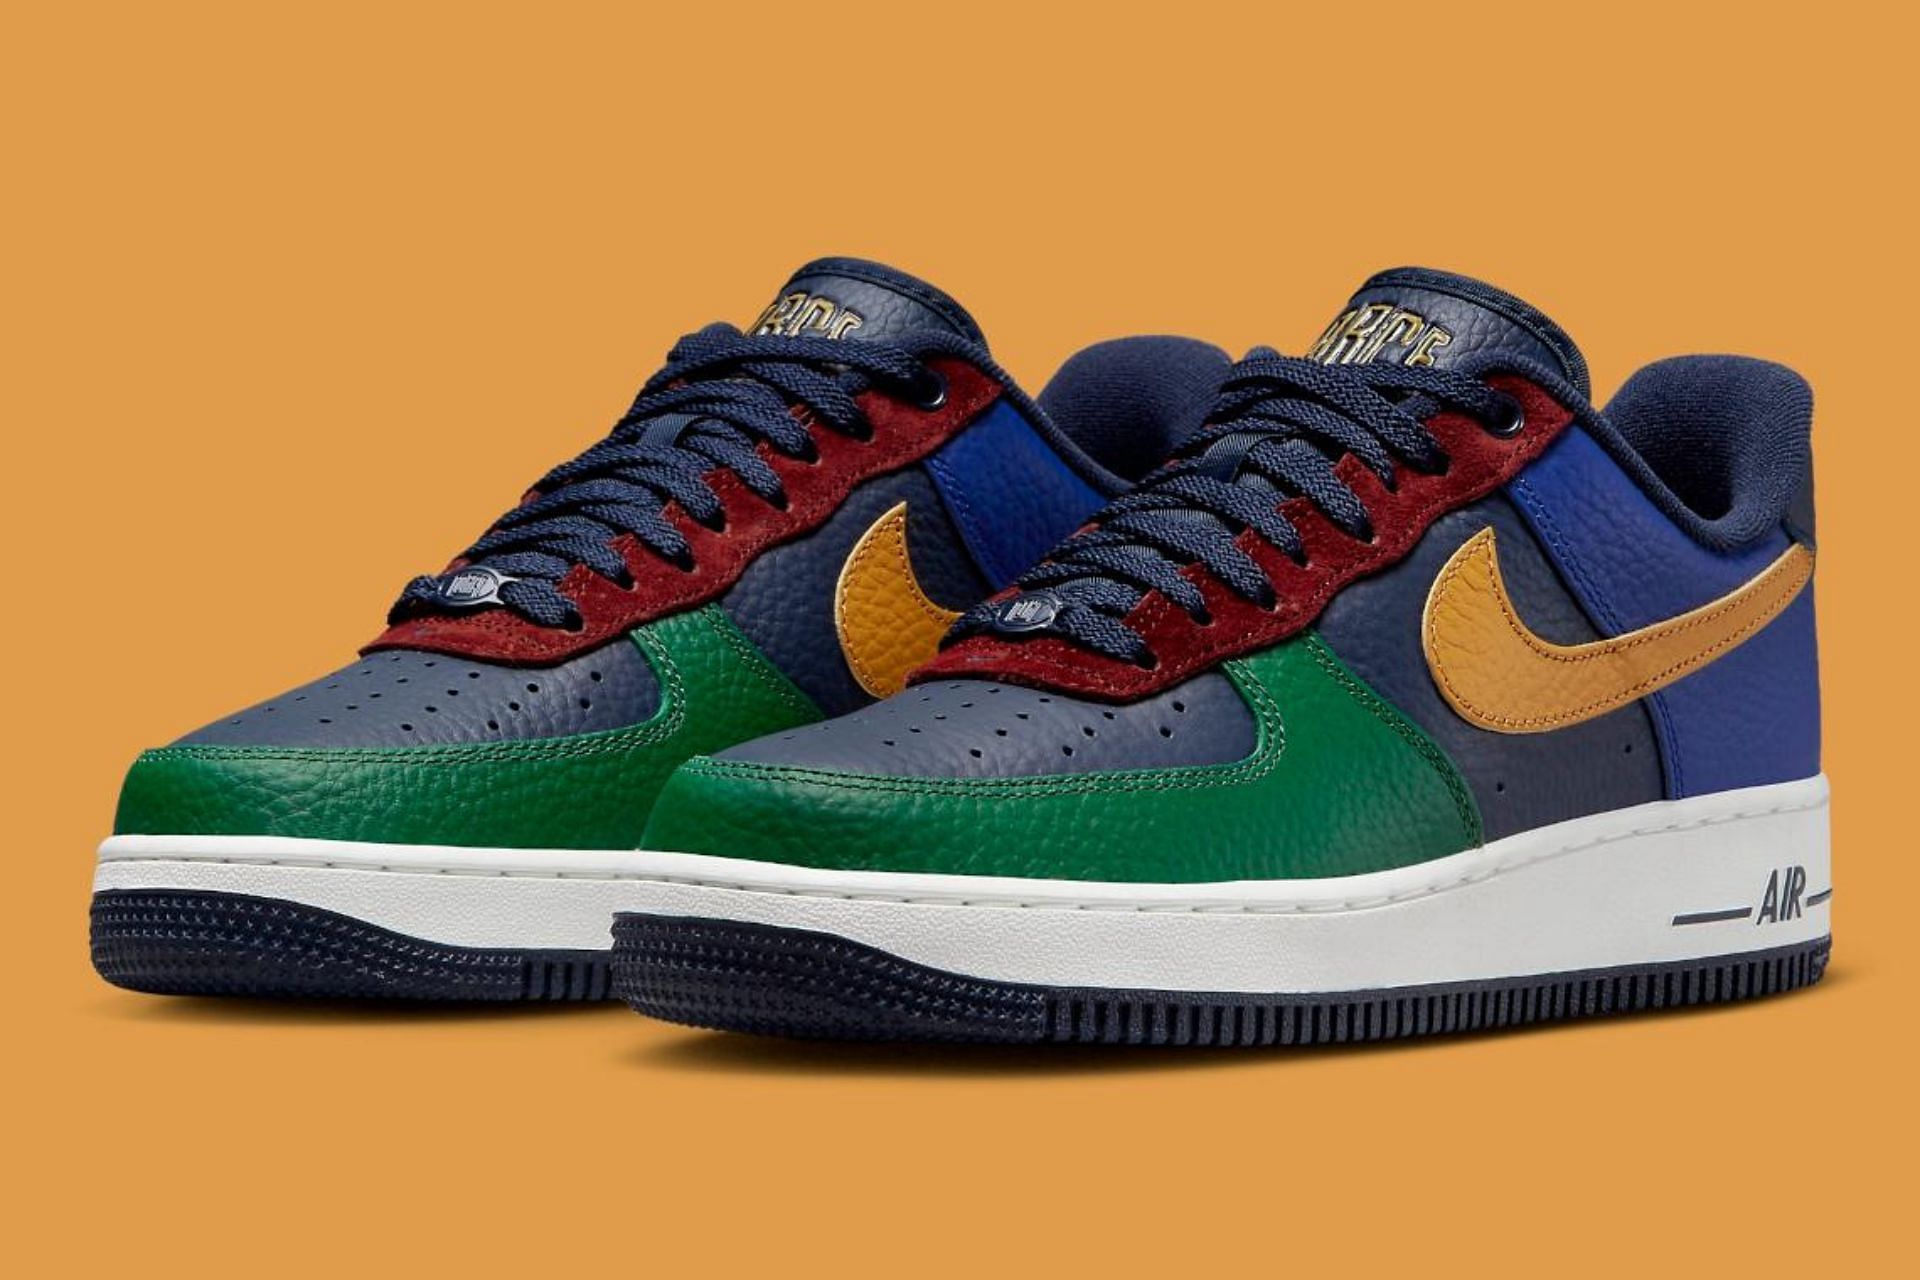 Nike Air Force 1 Low Command Force &quot;Gorge Green&quot; sneakers (Image via Nike)